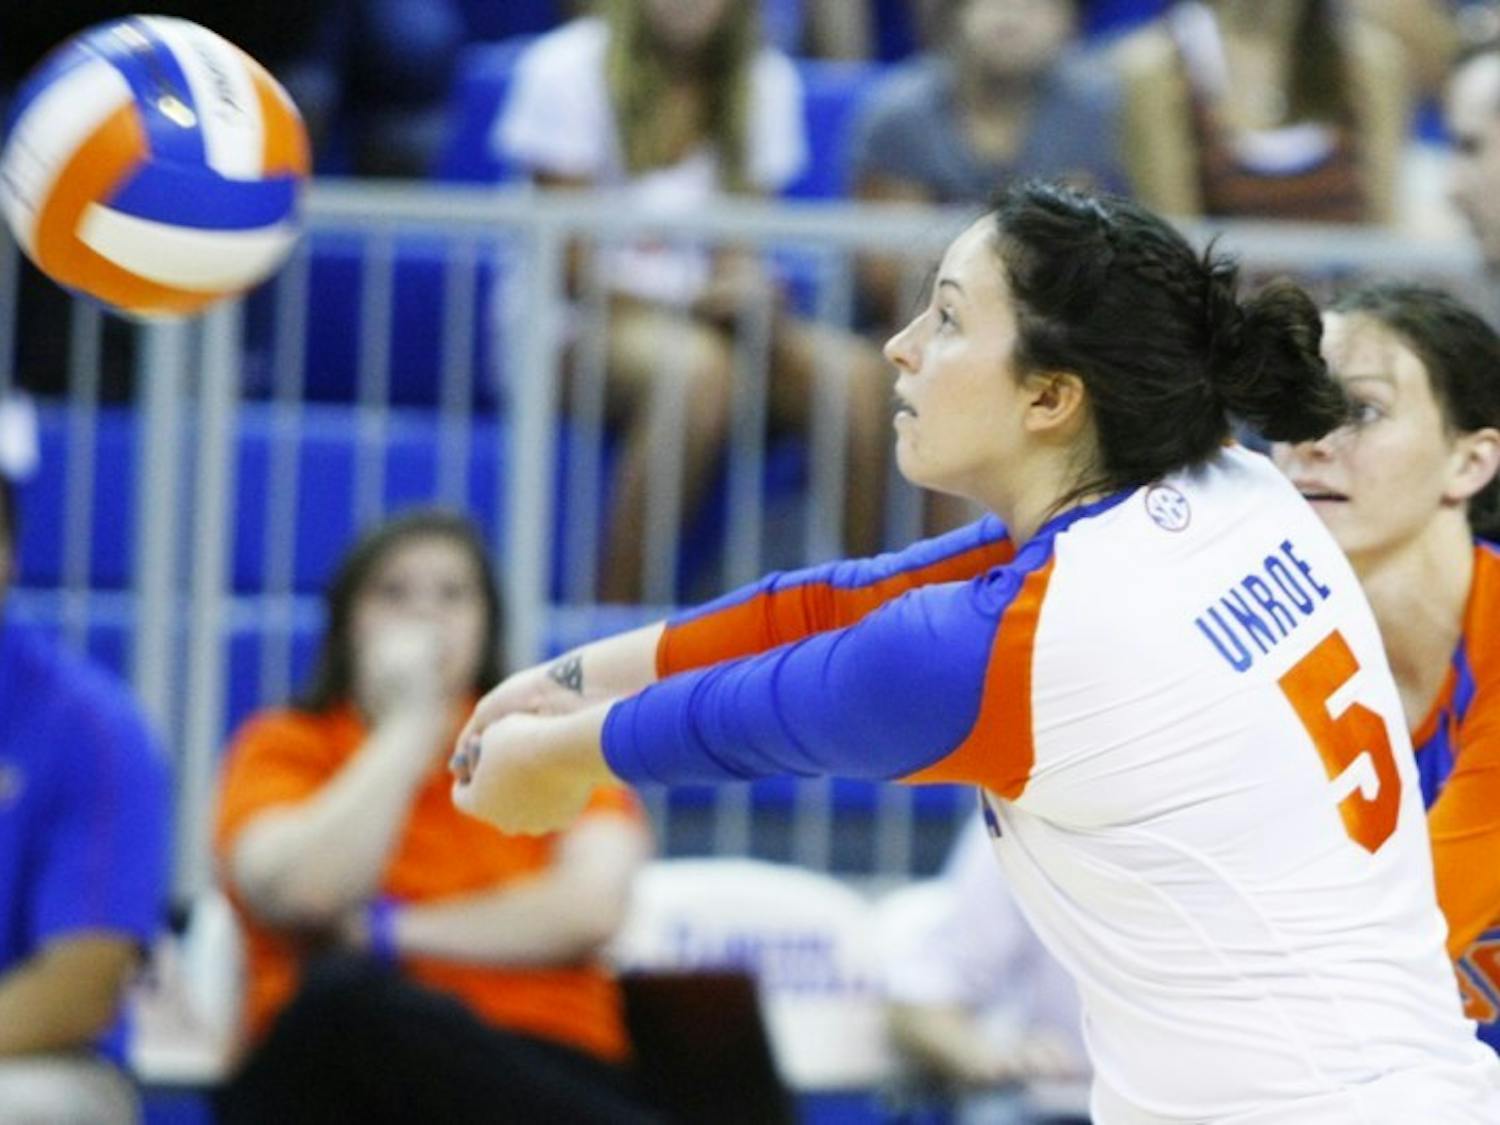 Sophomore Taylor Unroe (5) returns the ball against Florida Atlantic at the Stephen C. O'Connell Center on Aug. 24.